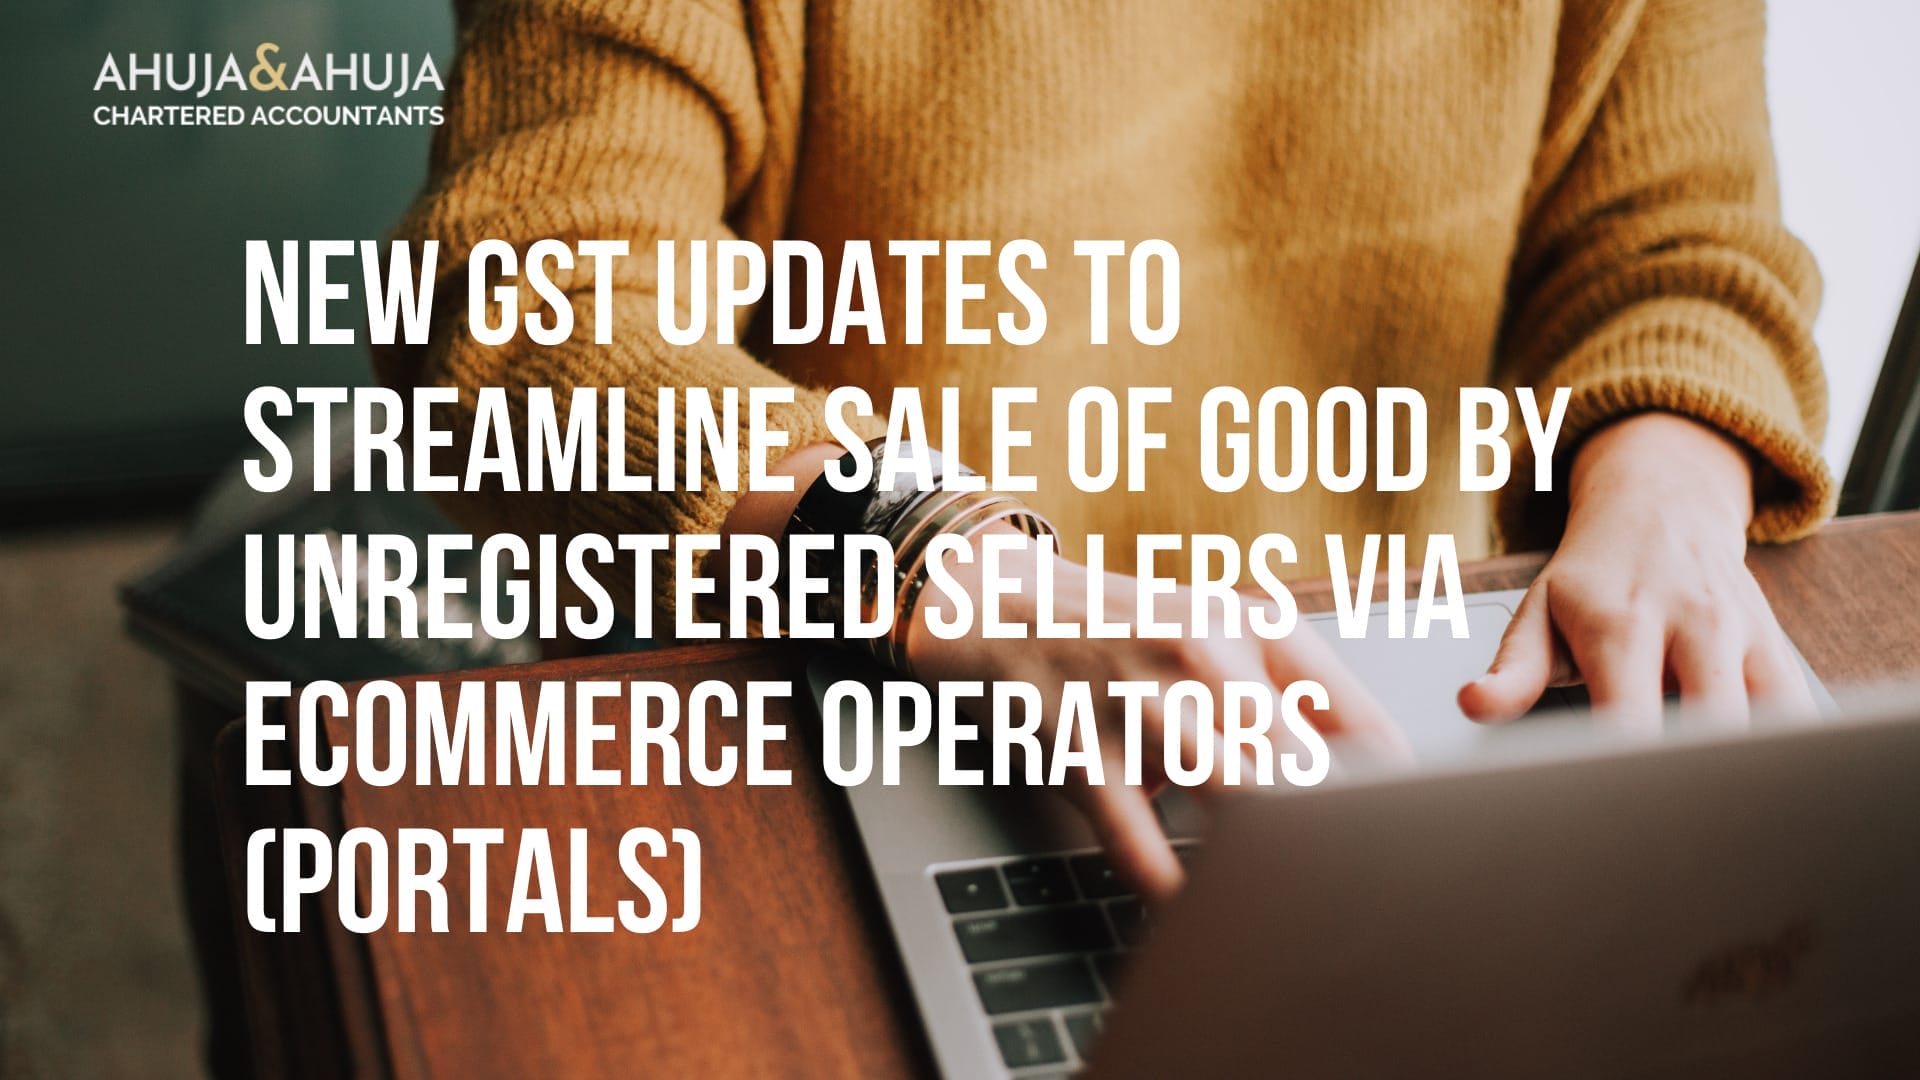 New GST Updates to Streamline Sale of Good by Unregistered Sellers